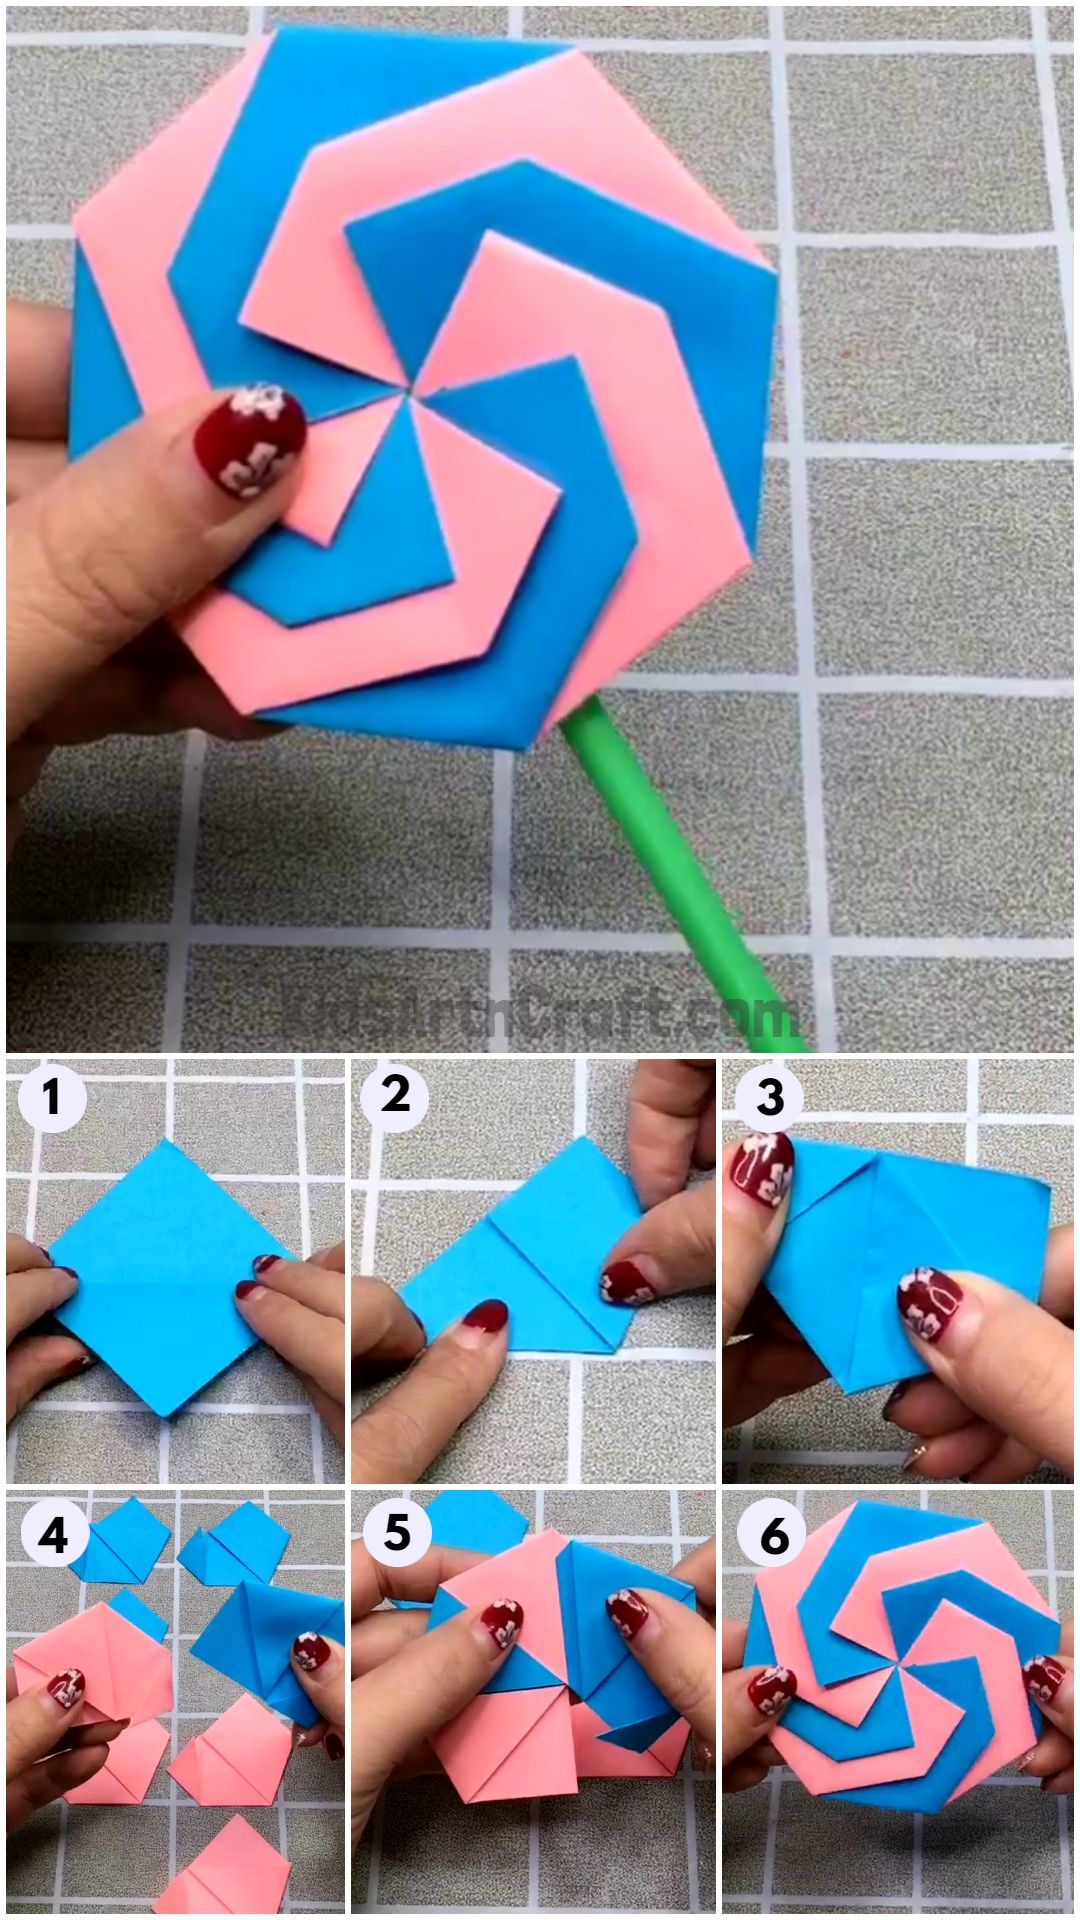  Paper Lollipop Craft - Learn to Make Origami Paper Candy with Step-By-Step Tutorial